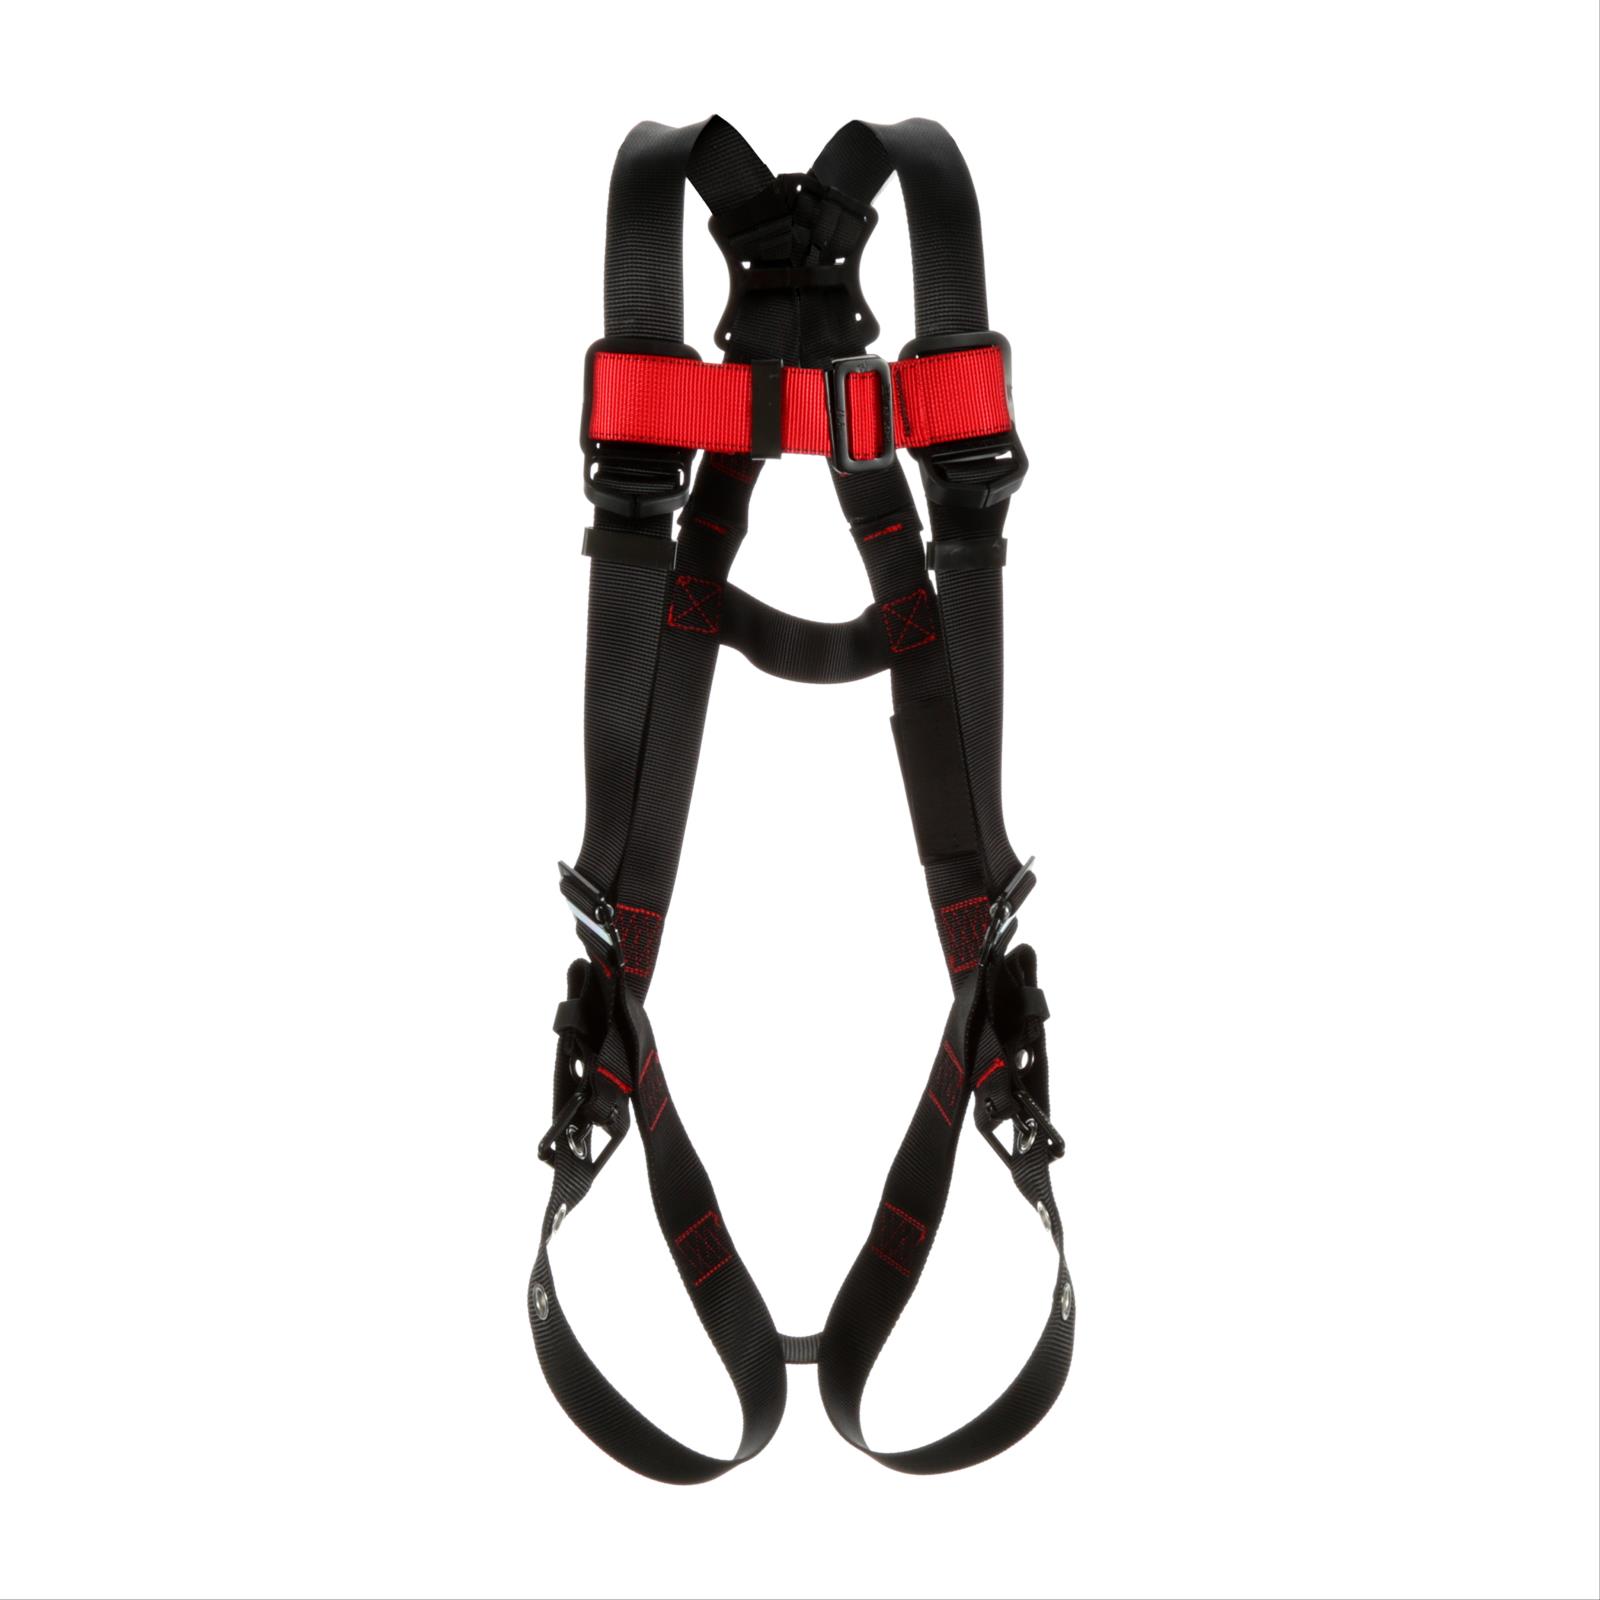 3M™ Protecta® Vest-Style Harness